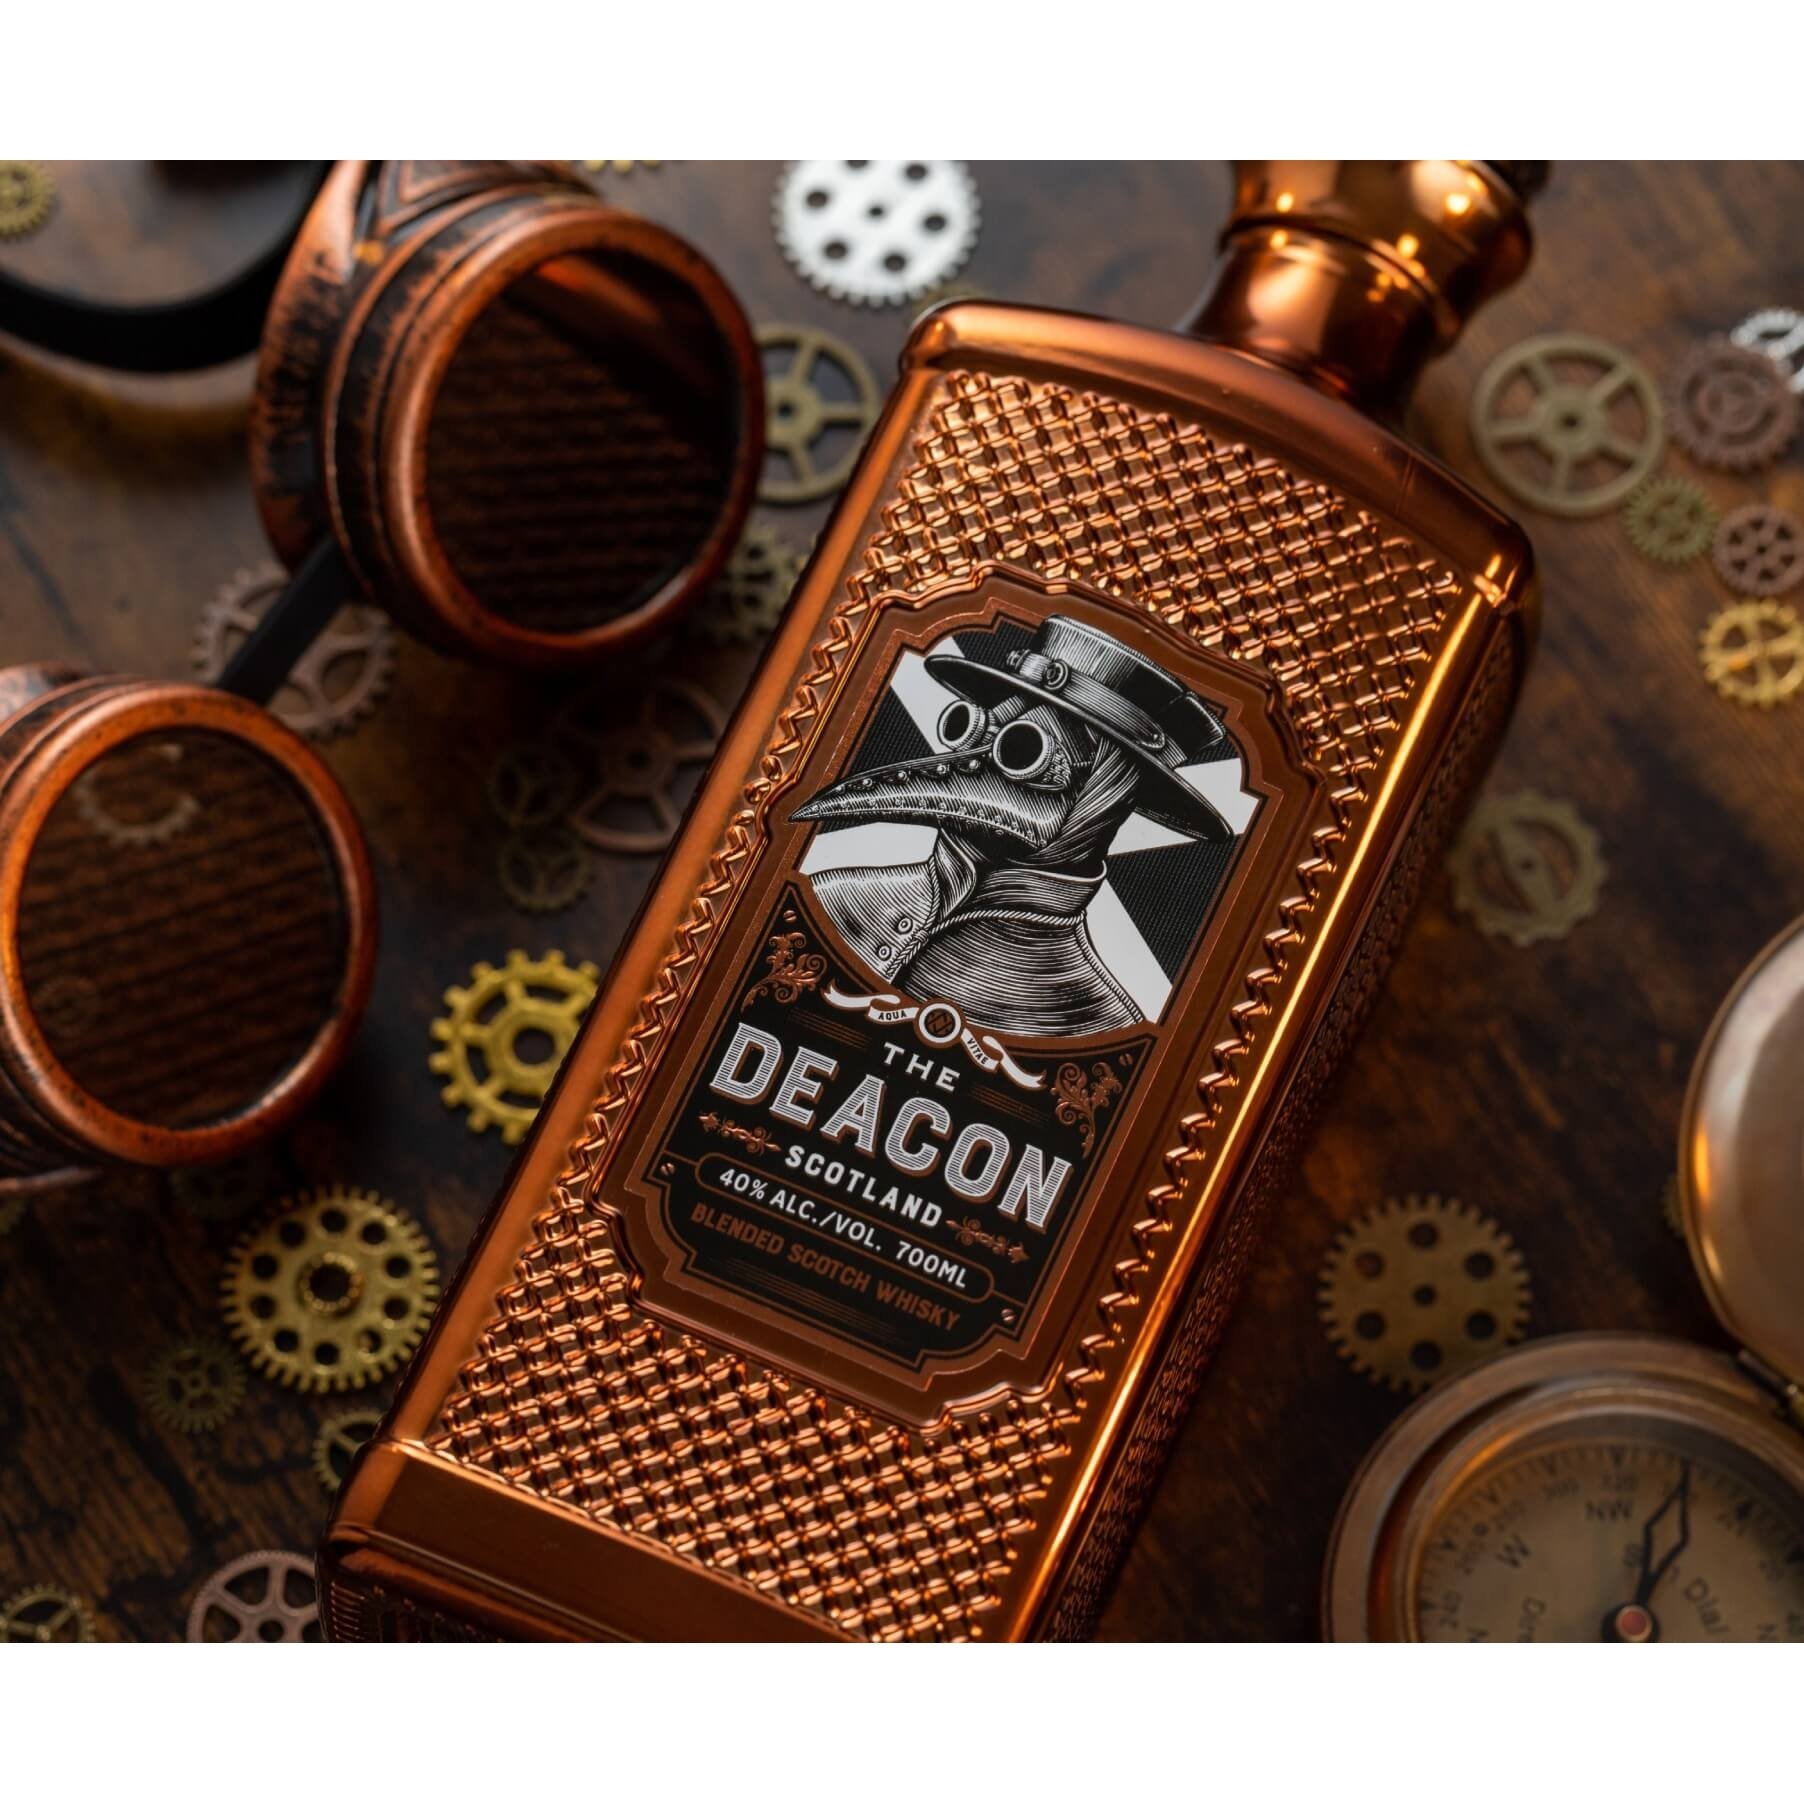 Виски The Deacon Blended Scotch Whisky 40% 0.7 л - фото 3